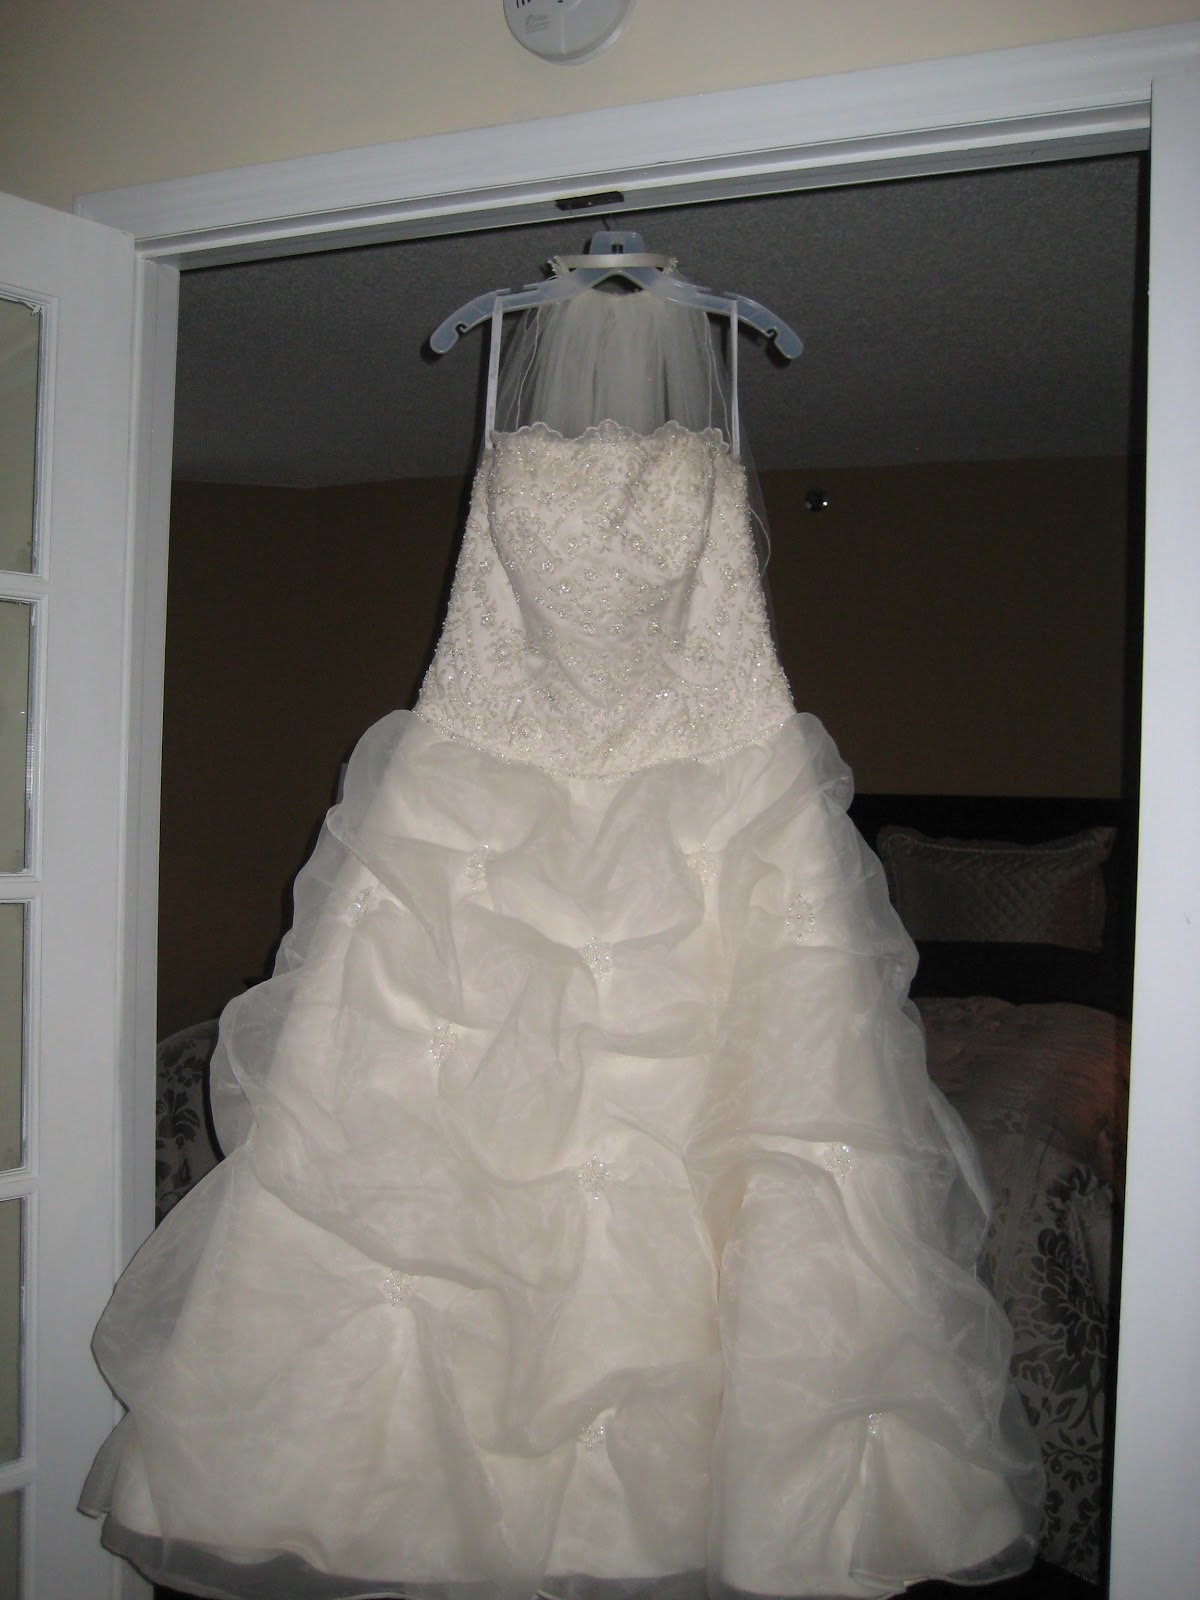 strapless wedding dresses with rhinestones The dress is size 16, I am a 10 jeans size, 5 feet tall and the heels 